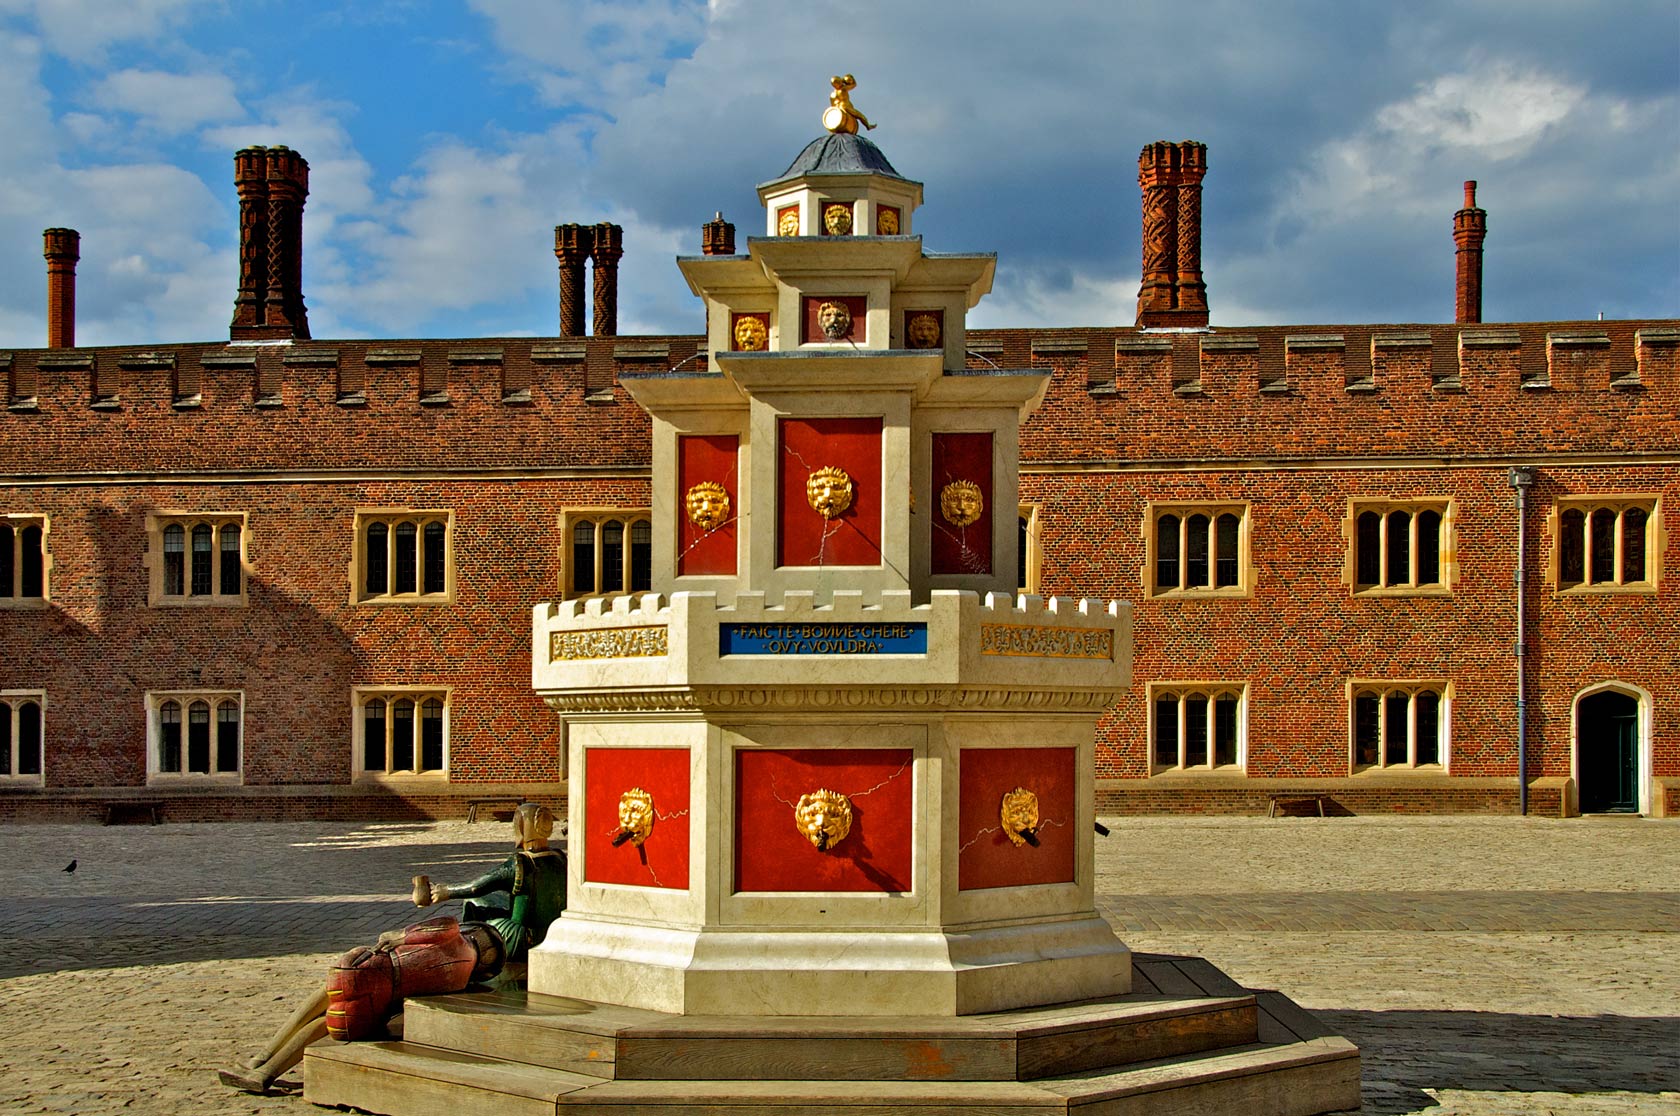 Replica of the 1520 wine fountain for King Henry VIII, Hampton Court Palace, United Kingdom